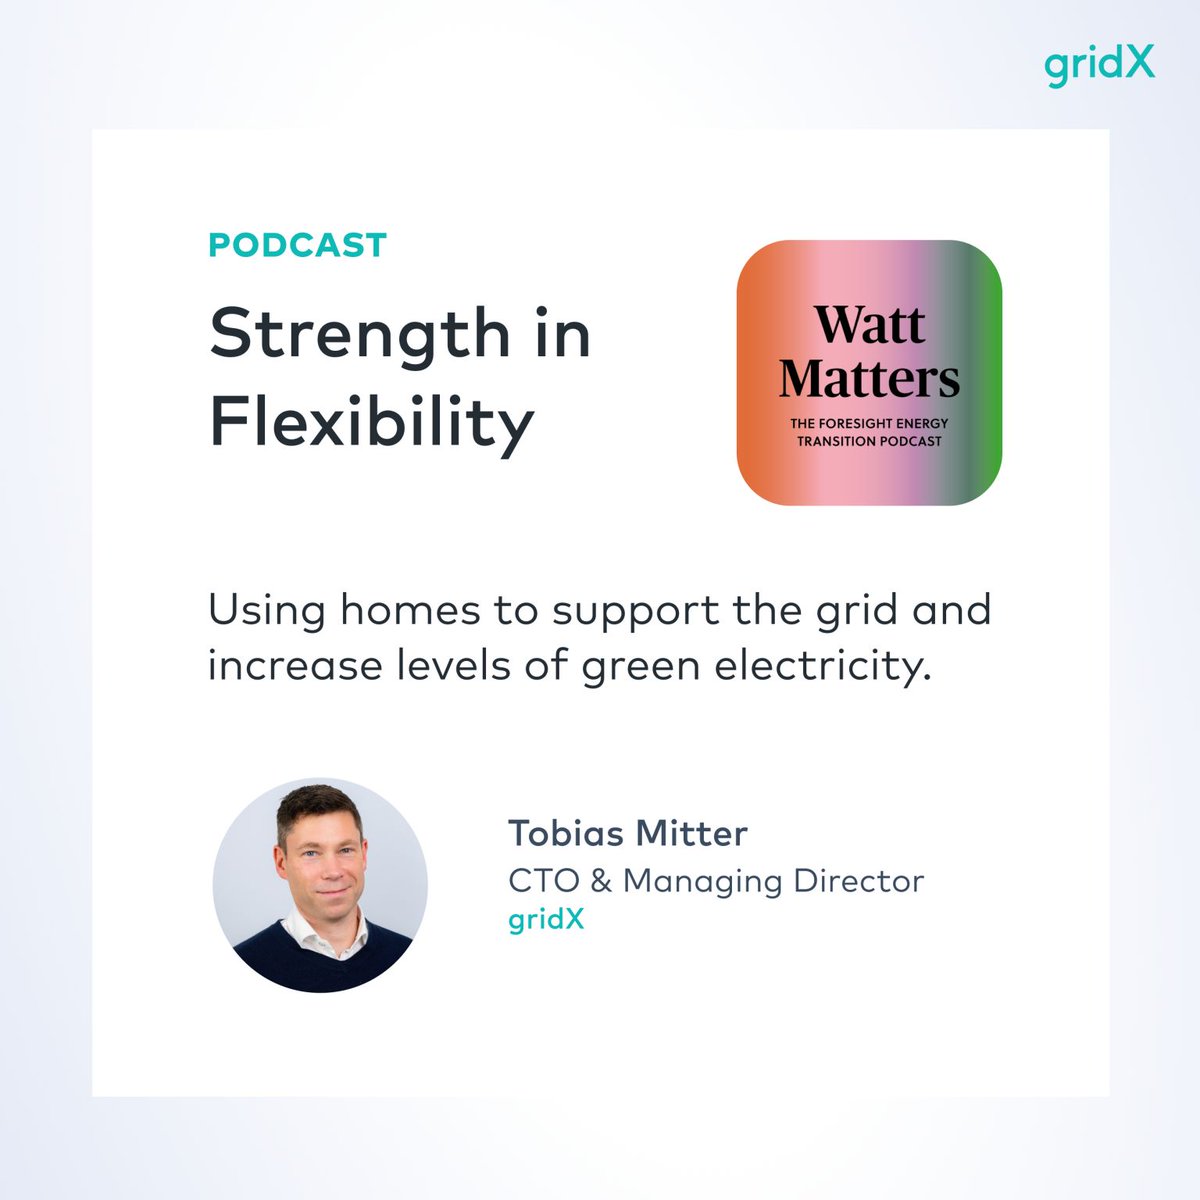 🎧 Tune in to the latest @WattMattersPod by @FORESIGHTdk with @TobiasMitter to explore how digital solutions unlock the potential of flexible demand.

🎧Listen now: bit.ly/3XdrDb7

#energytransition #energyflexibility #energymanagementsystem #climatechange #energy